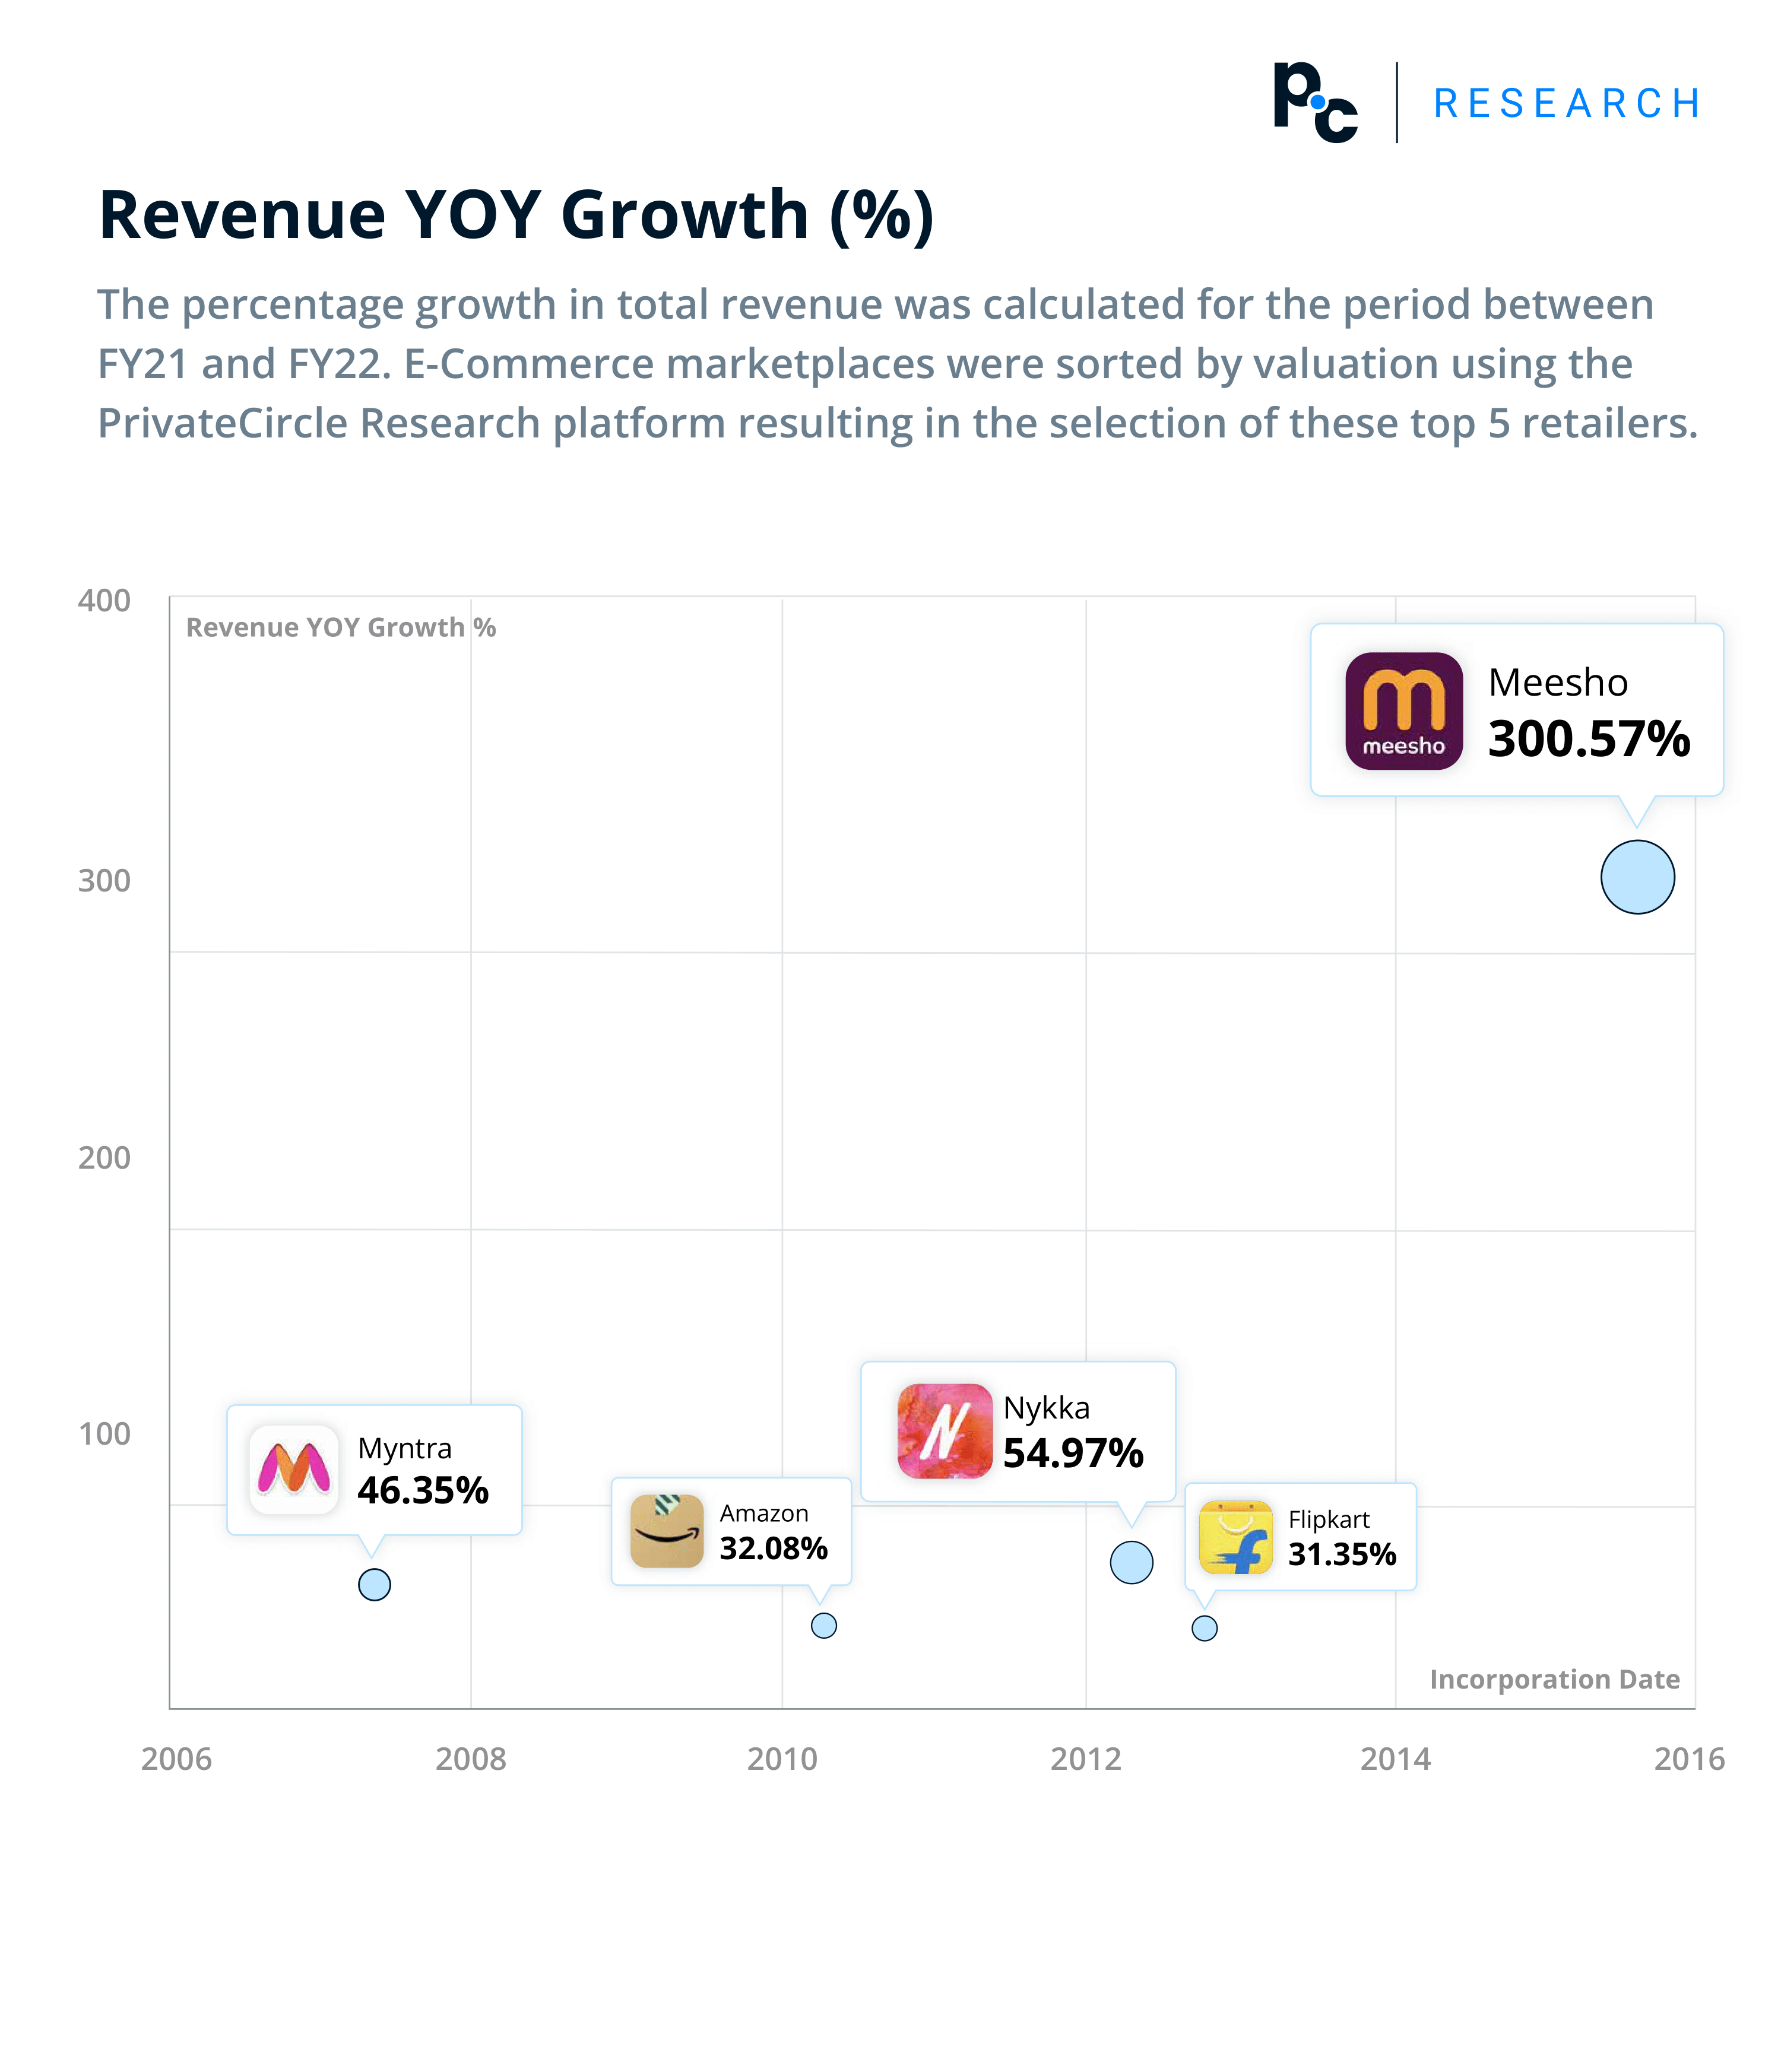 Indian E-Commerce Companies FY22: Revenue YOY Growth (%).

The percentage growth in total revenue was calculated for the period between FY21 and FY22. E-Commerce marketplaces were sorted by valuation using the PrivateCircle Research platform resulting in the selection of these top 5 retailers.
